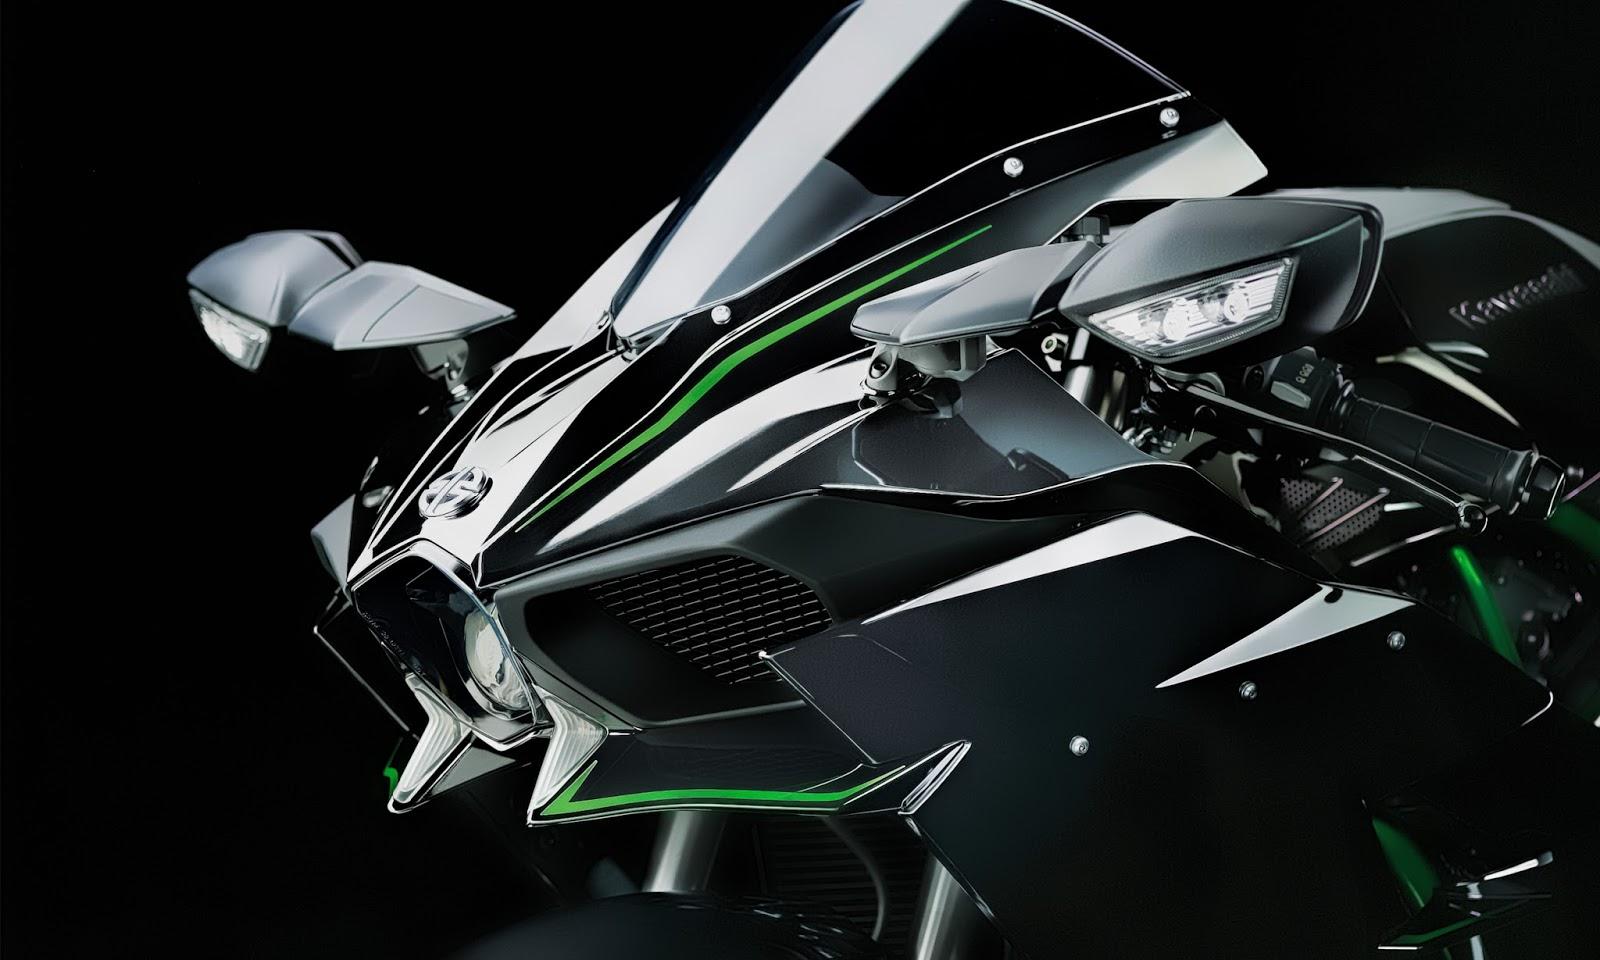 H2R Wallpaper. H2R Wallpaper, Kawasaki H2R Wallpaper and H2R Wallpaper 4K